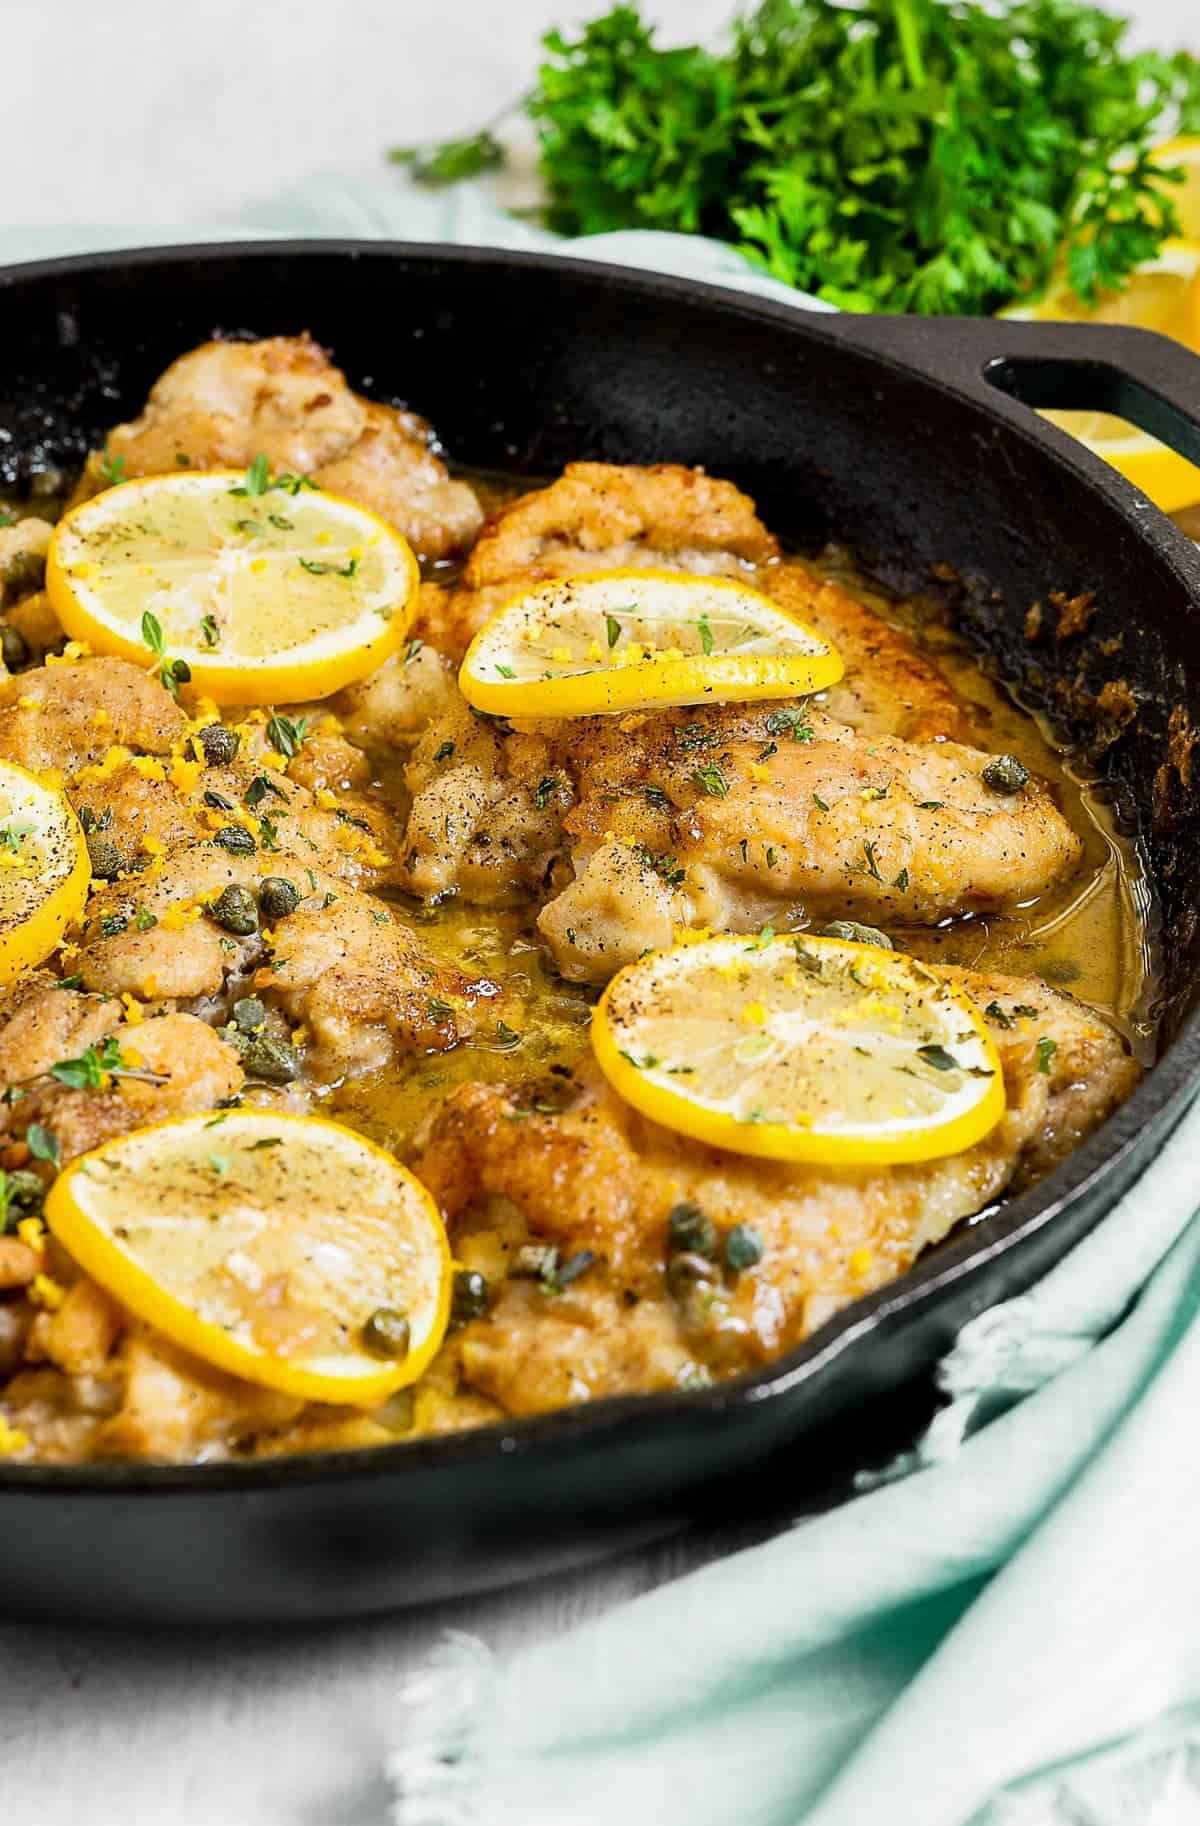 Lemon slices on top of cooked chicken in a skillet